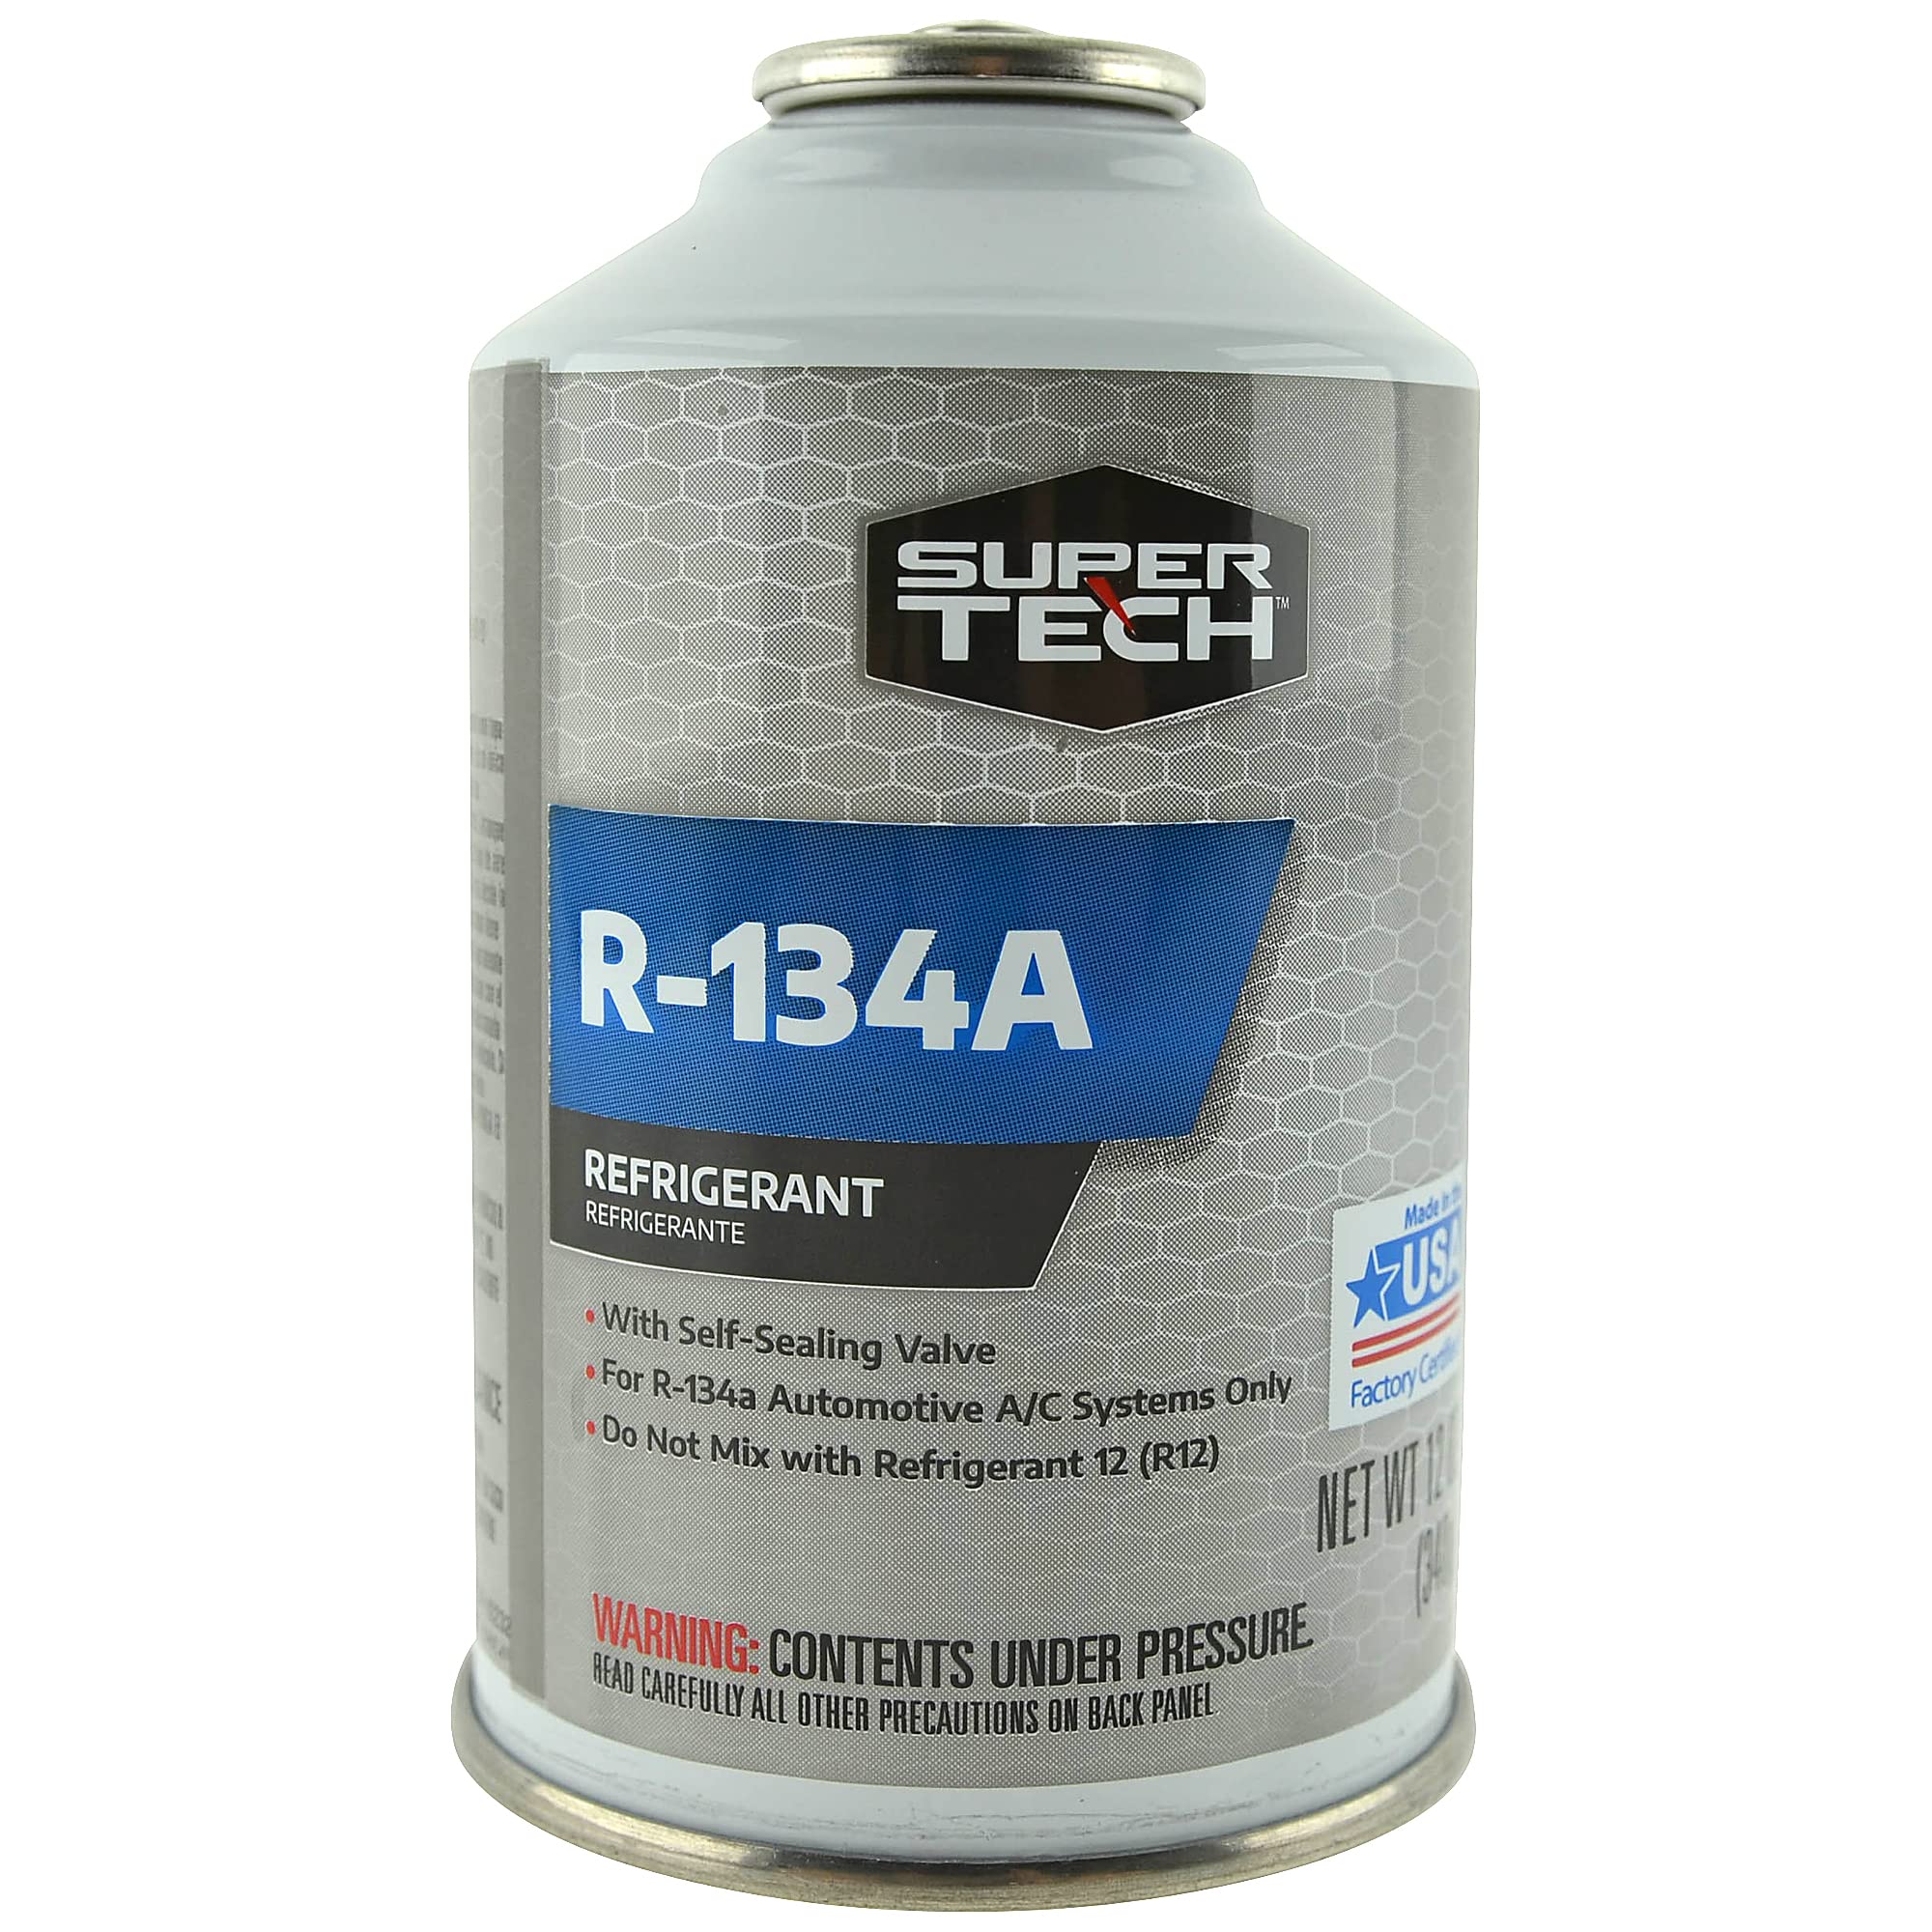 Supertech R-134A Refrigerant Automotive Use In A 12Oz Self-Sealing Container